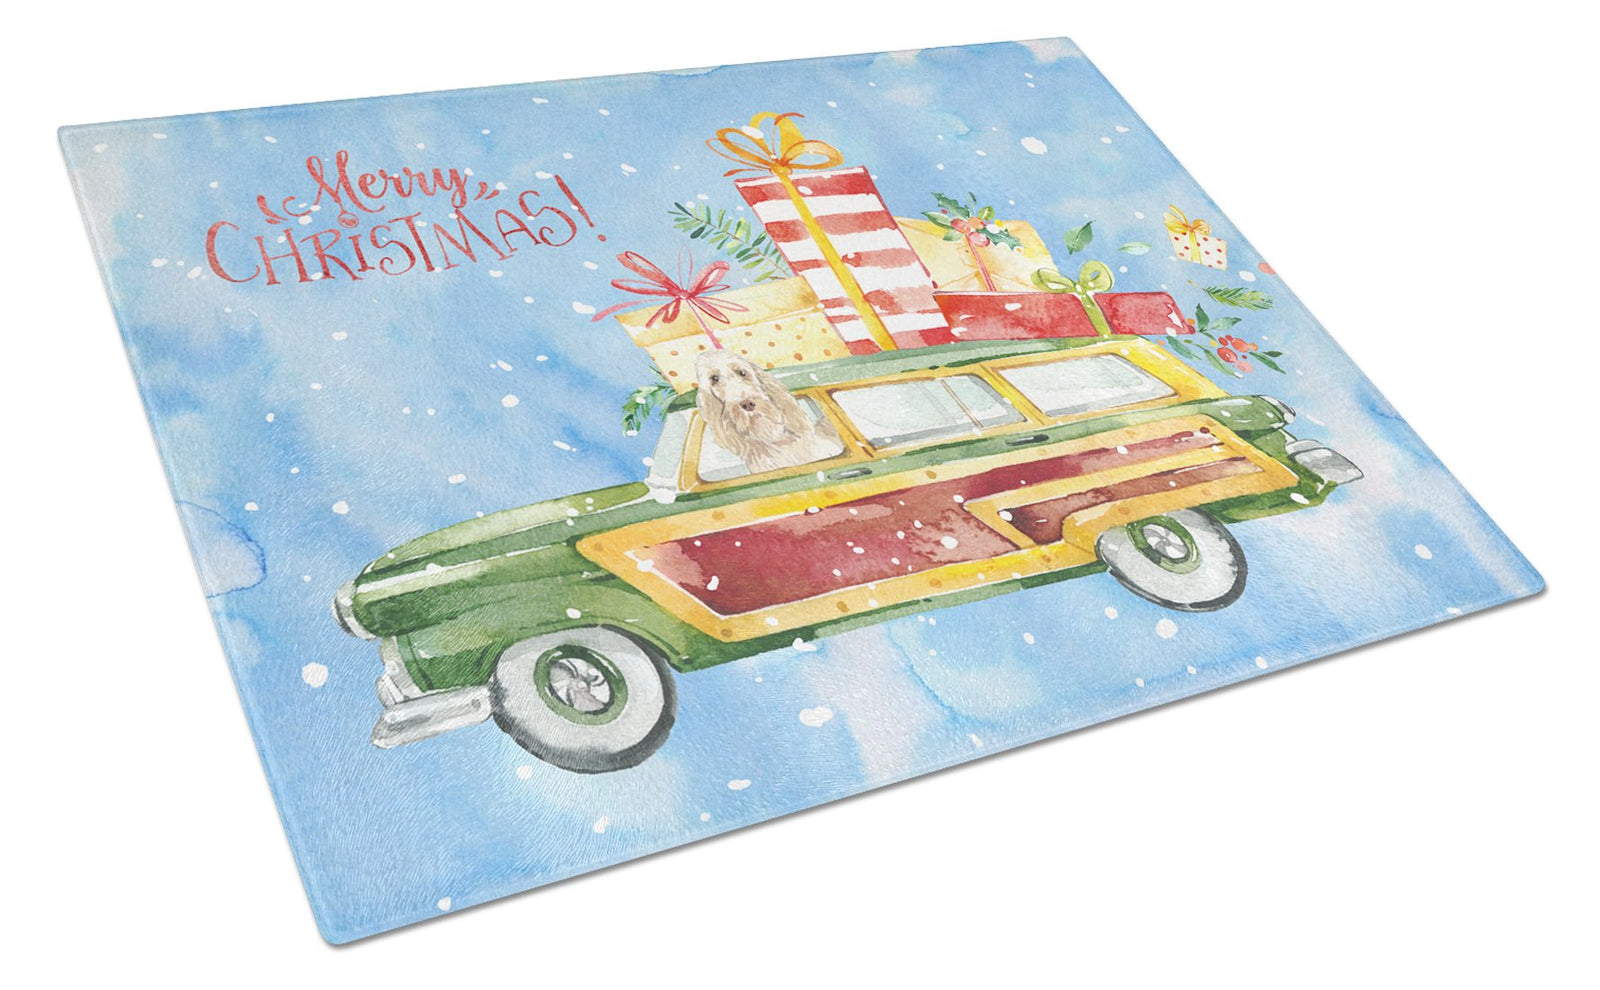 Merry Christmas Spinone Italiano Glass Cutting Board Large CK2425LCB by Caroline's Treasures